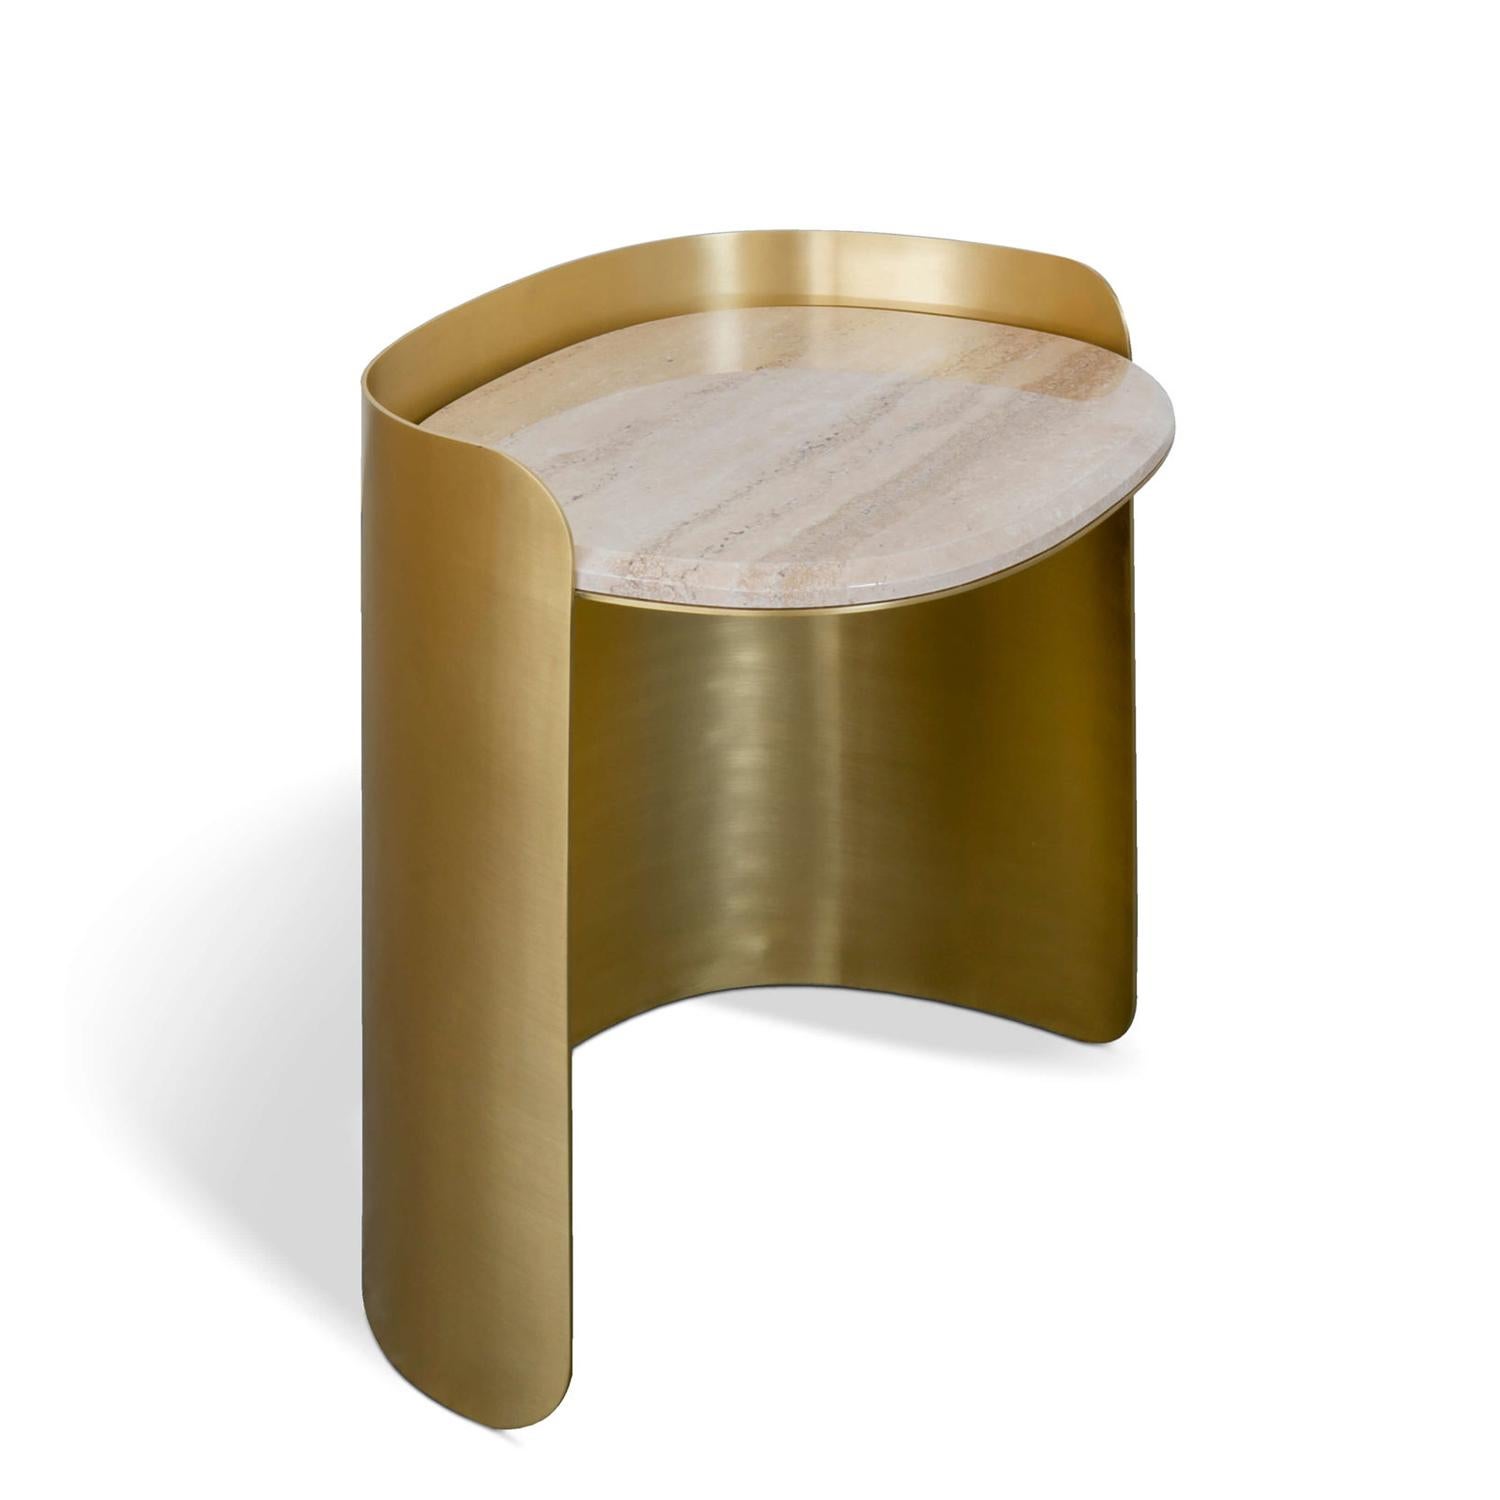 Side table curved brass with structure
in solid brass in aged finish. With oval travertine
stone top.